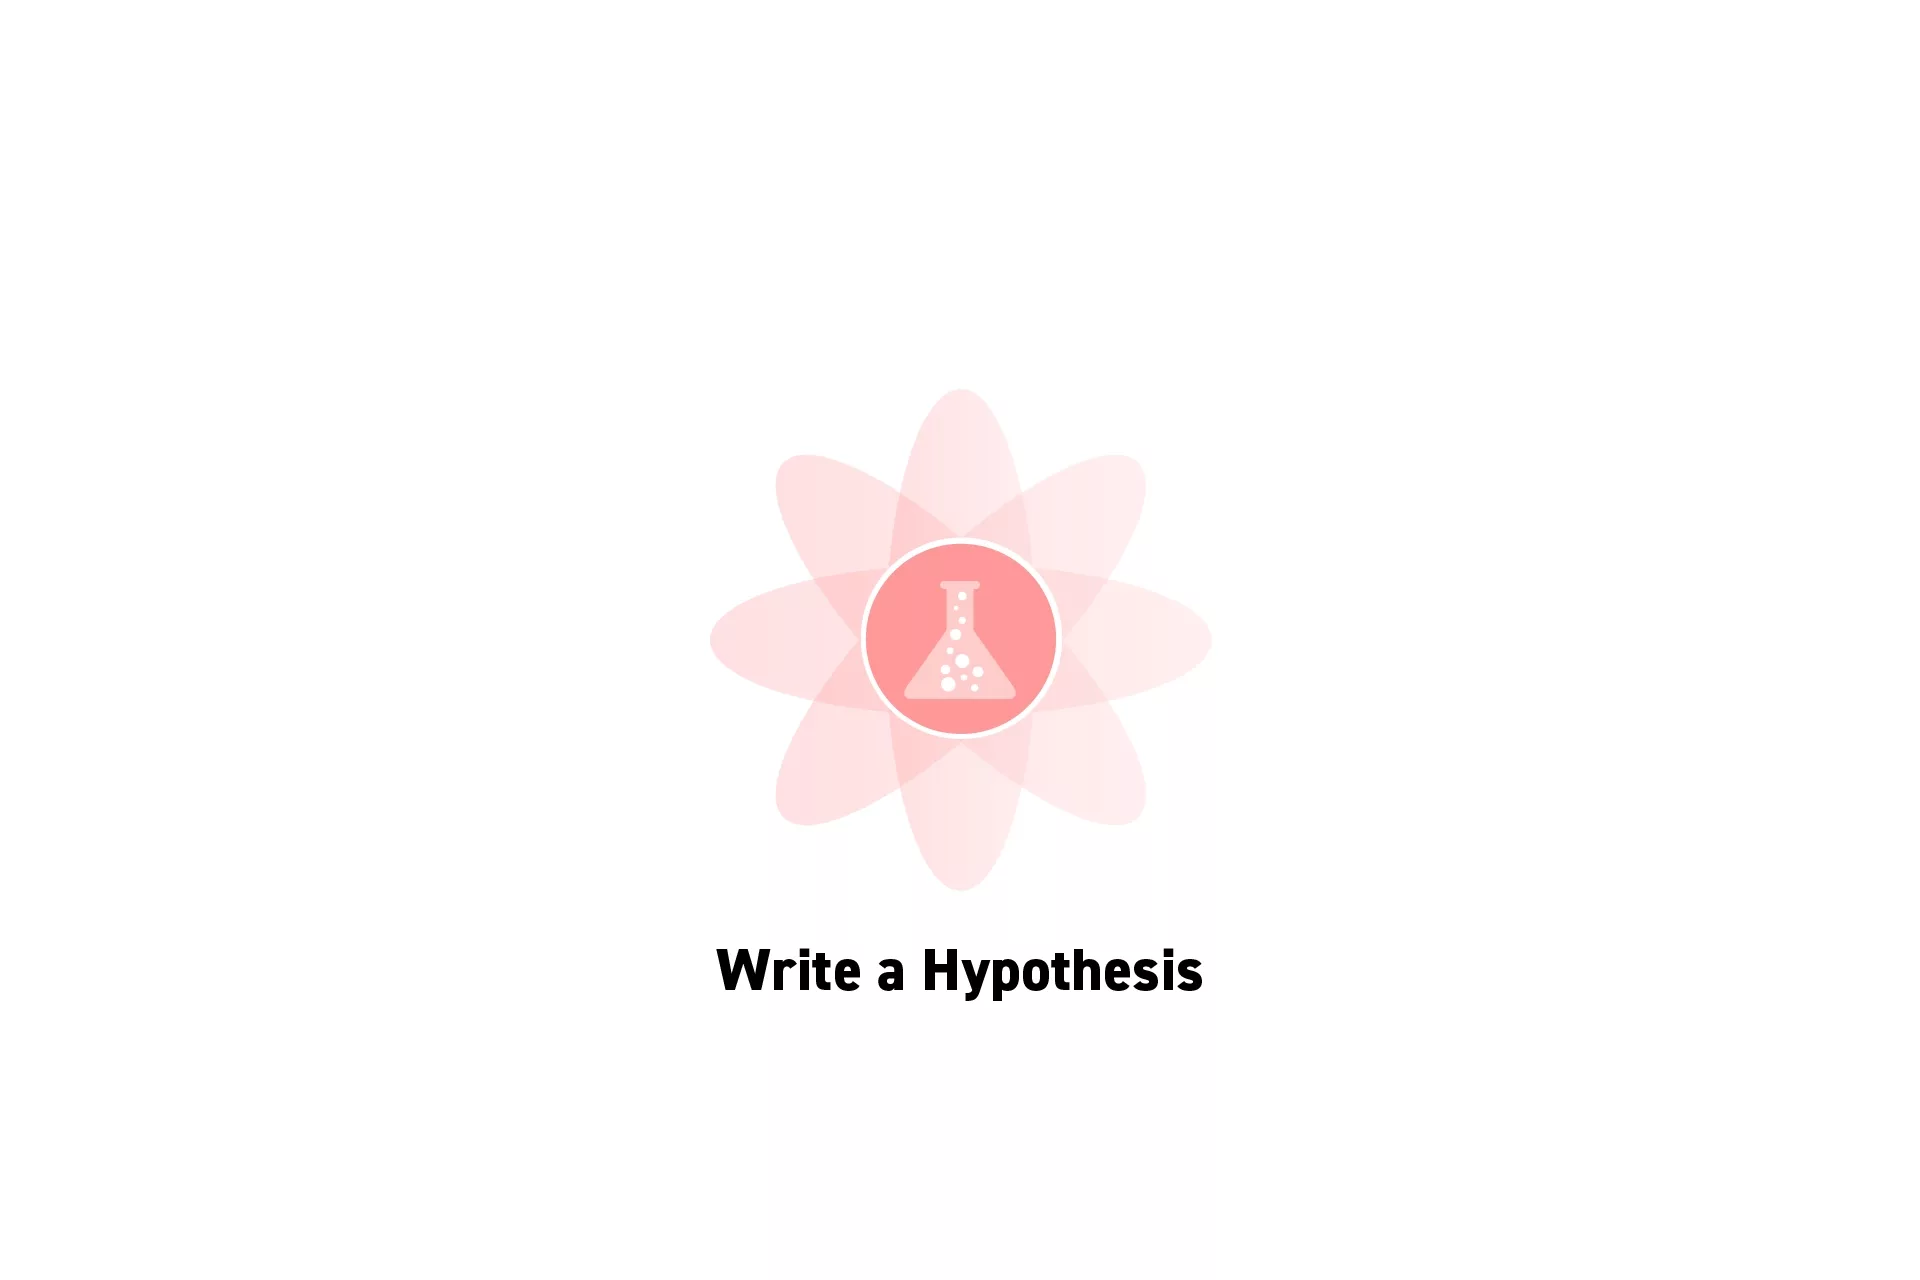 A flower that represents Strategy with the text “Write a Hypothesis” beneath it.